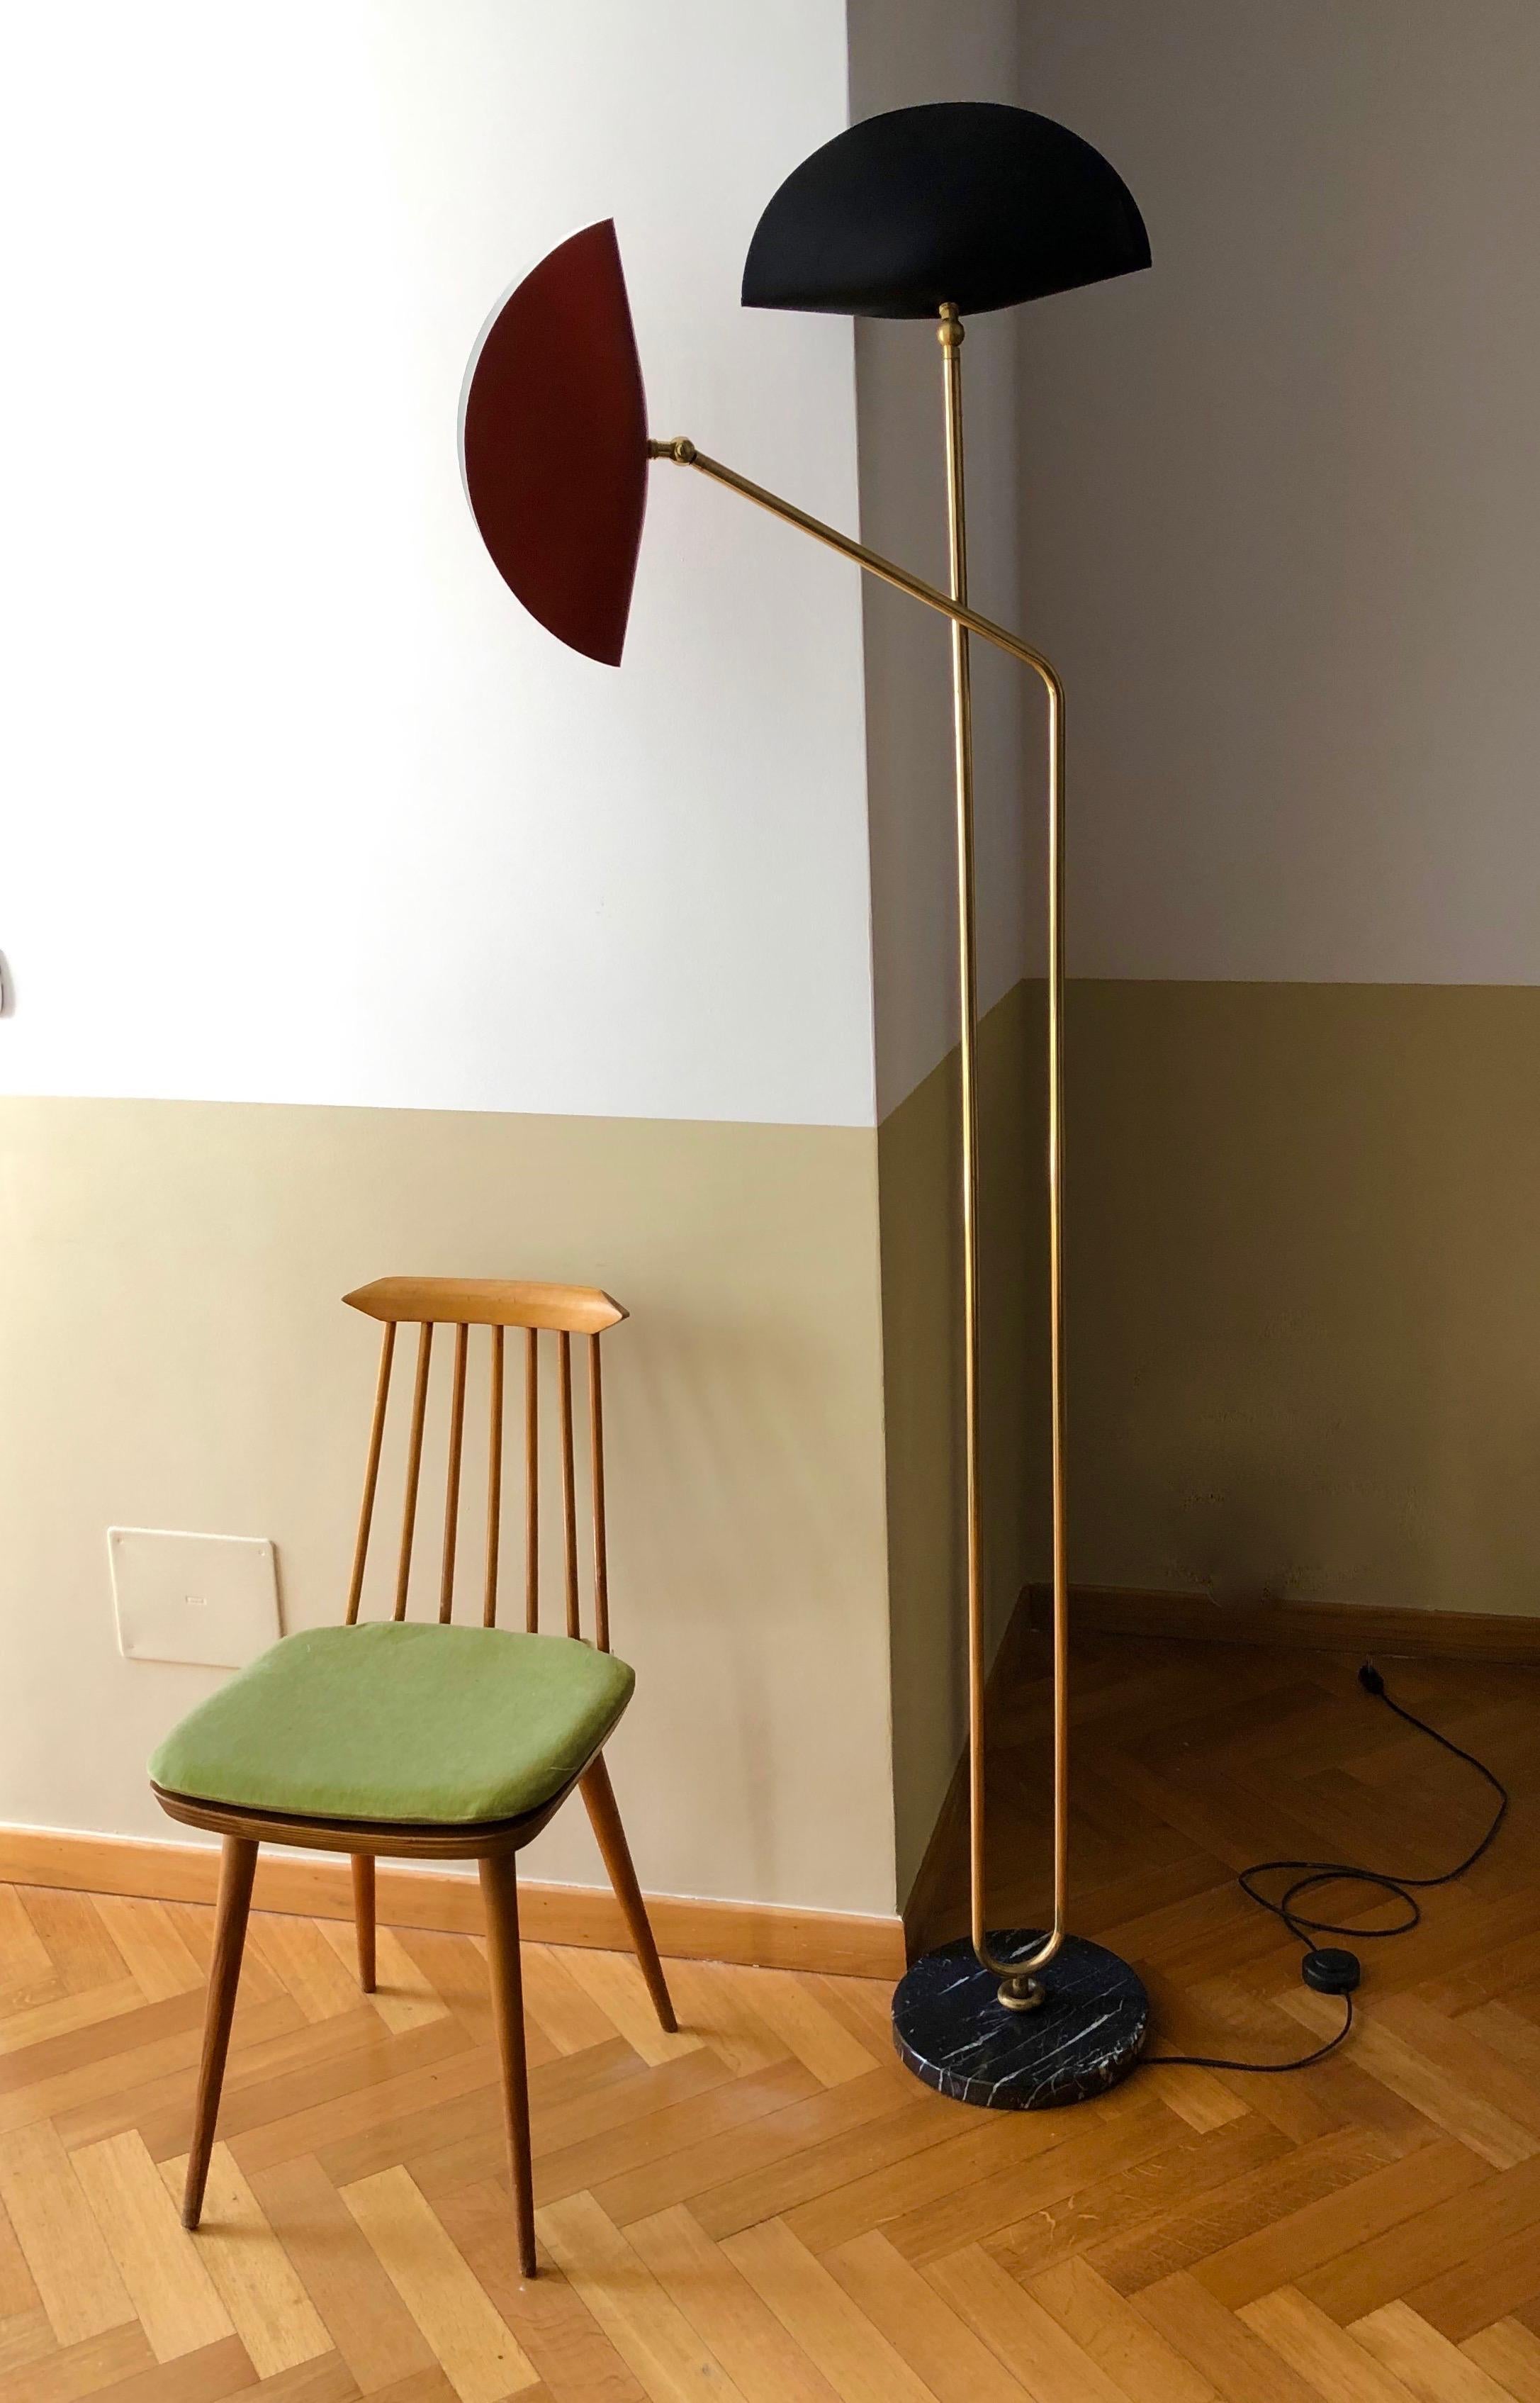 Italian floor lamp in brass and marble base, designed by Cellule Creative Studio for Gallery Misia Arte.

Misia Arte is an historic Italian gallery in business for 40 years, always active in the design and decorative arts scene.